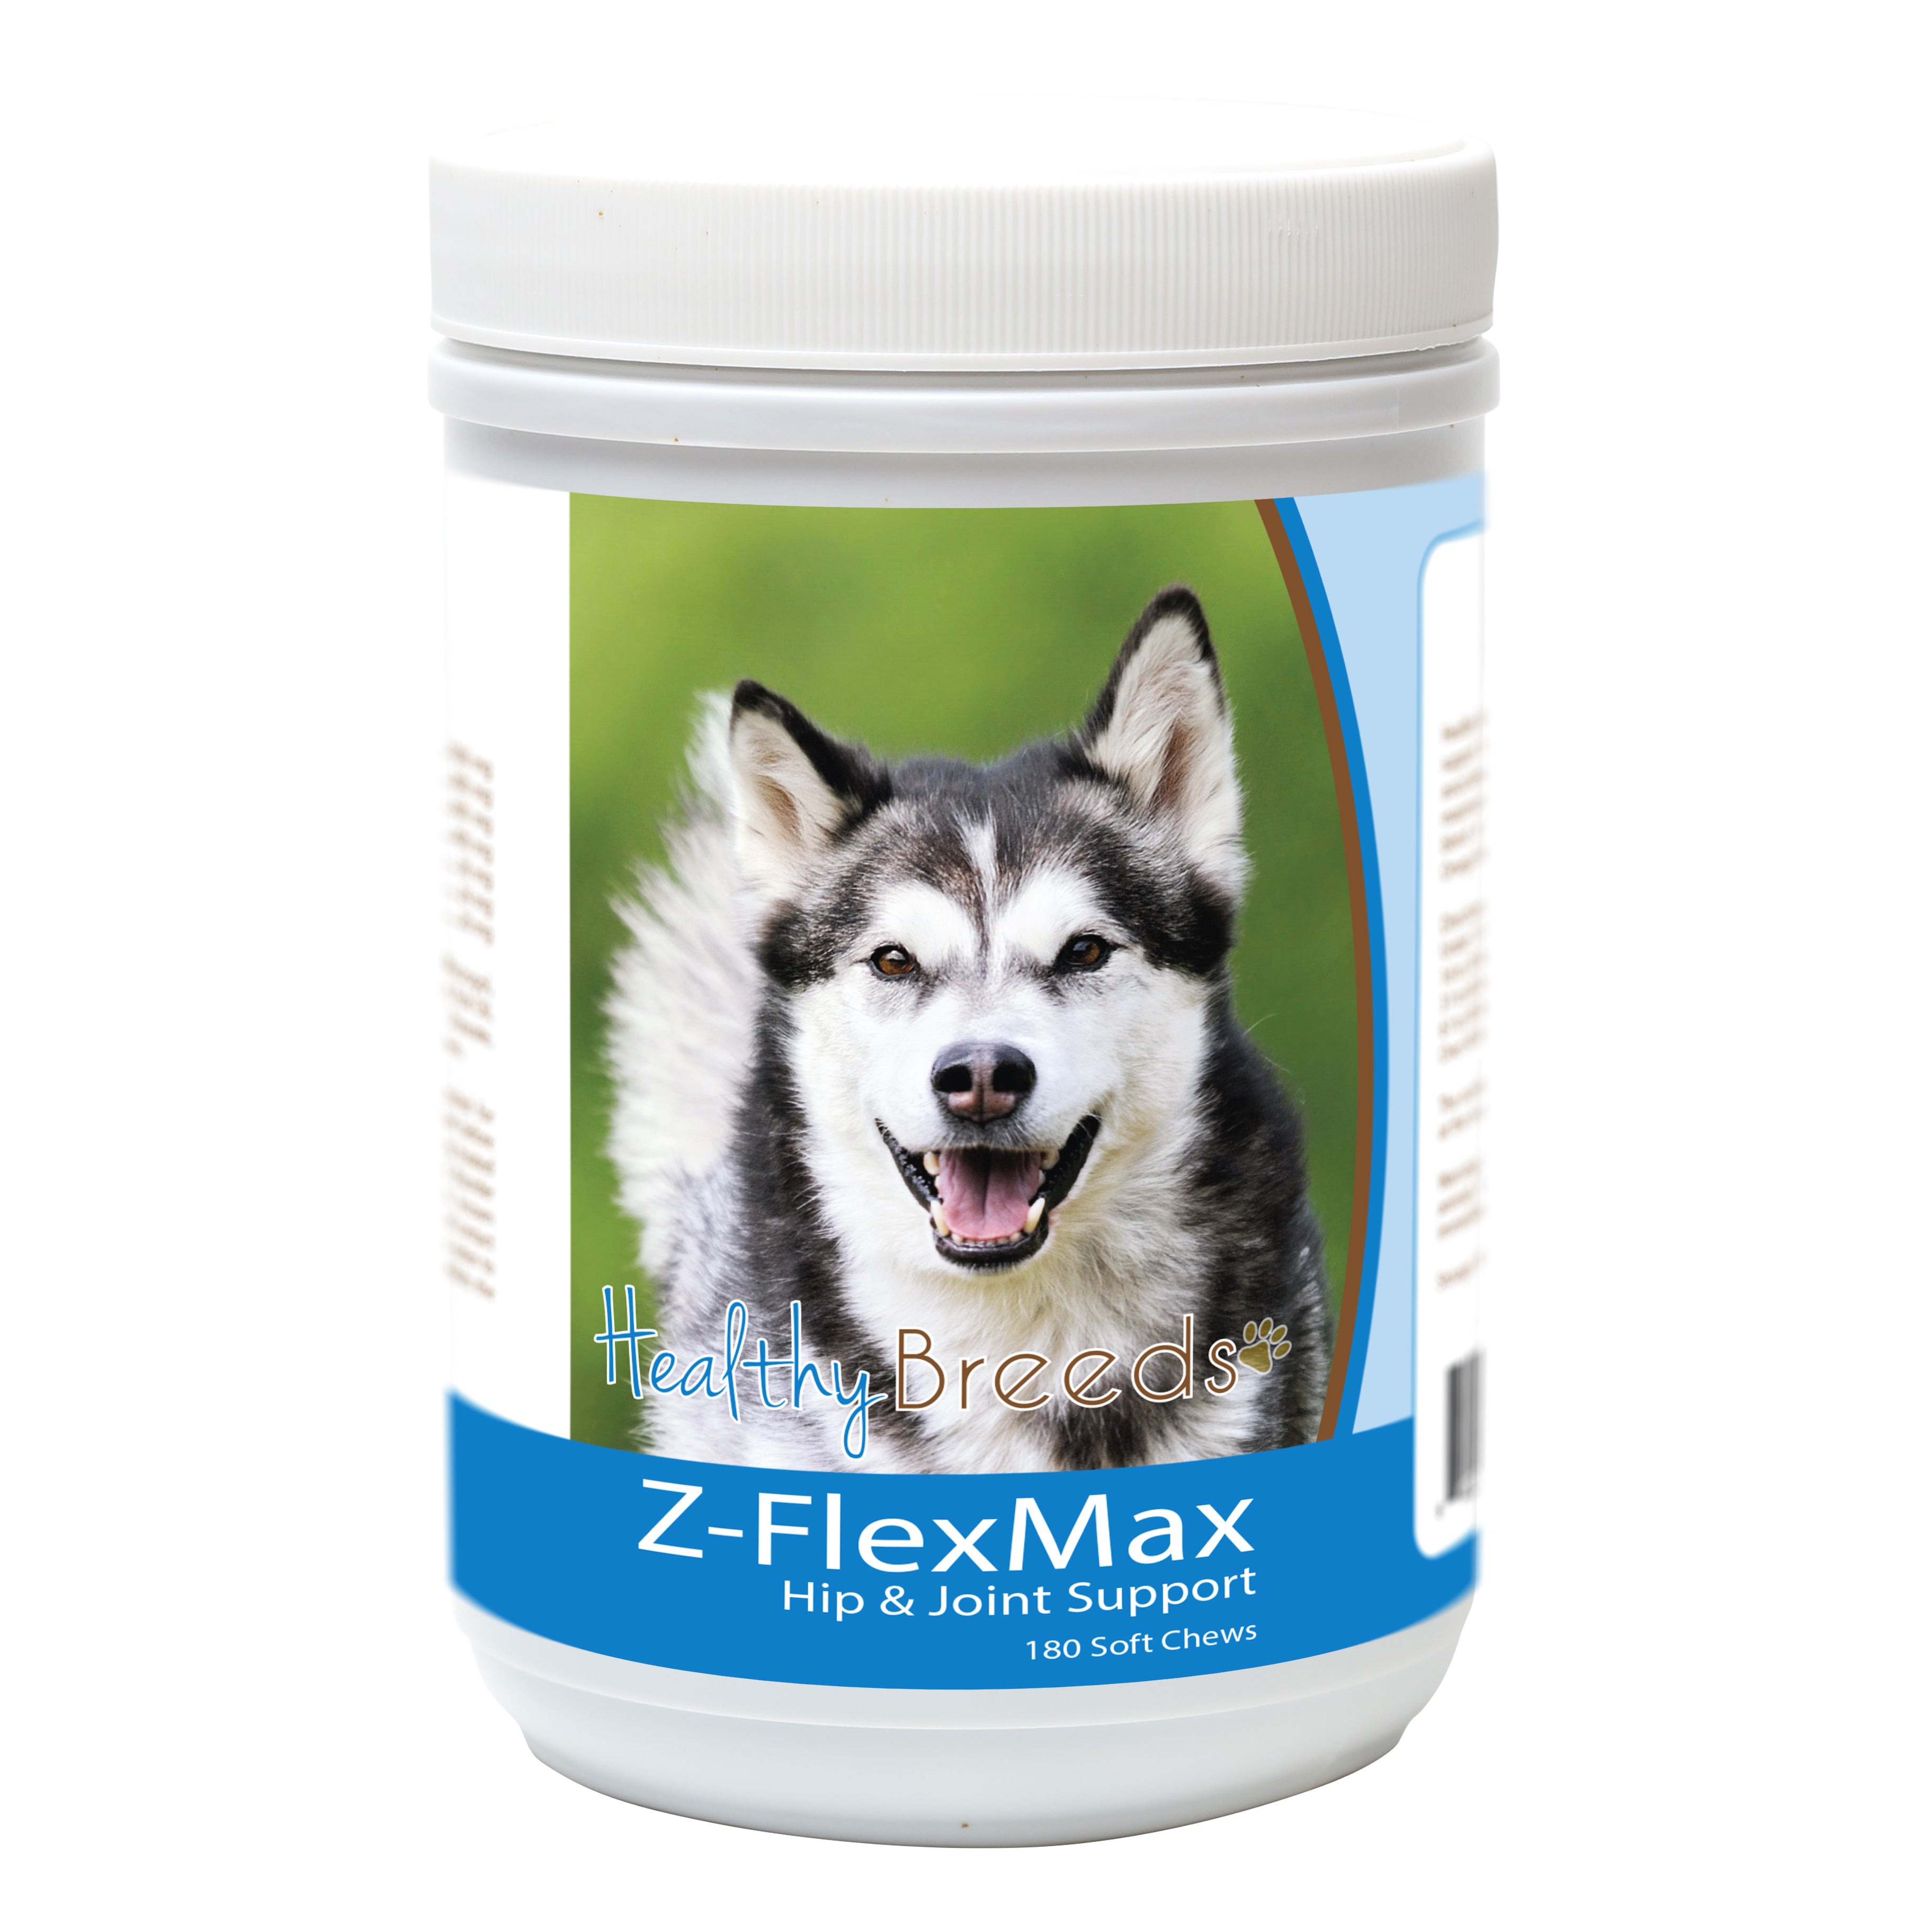 Alaskan Malamute Z-Flex Max Dog Hip and Joint Support 180 Count